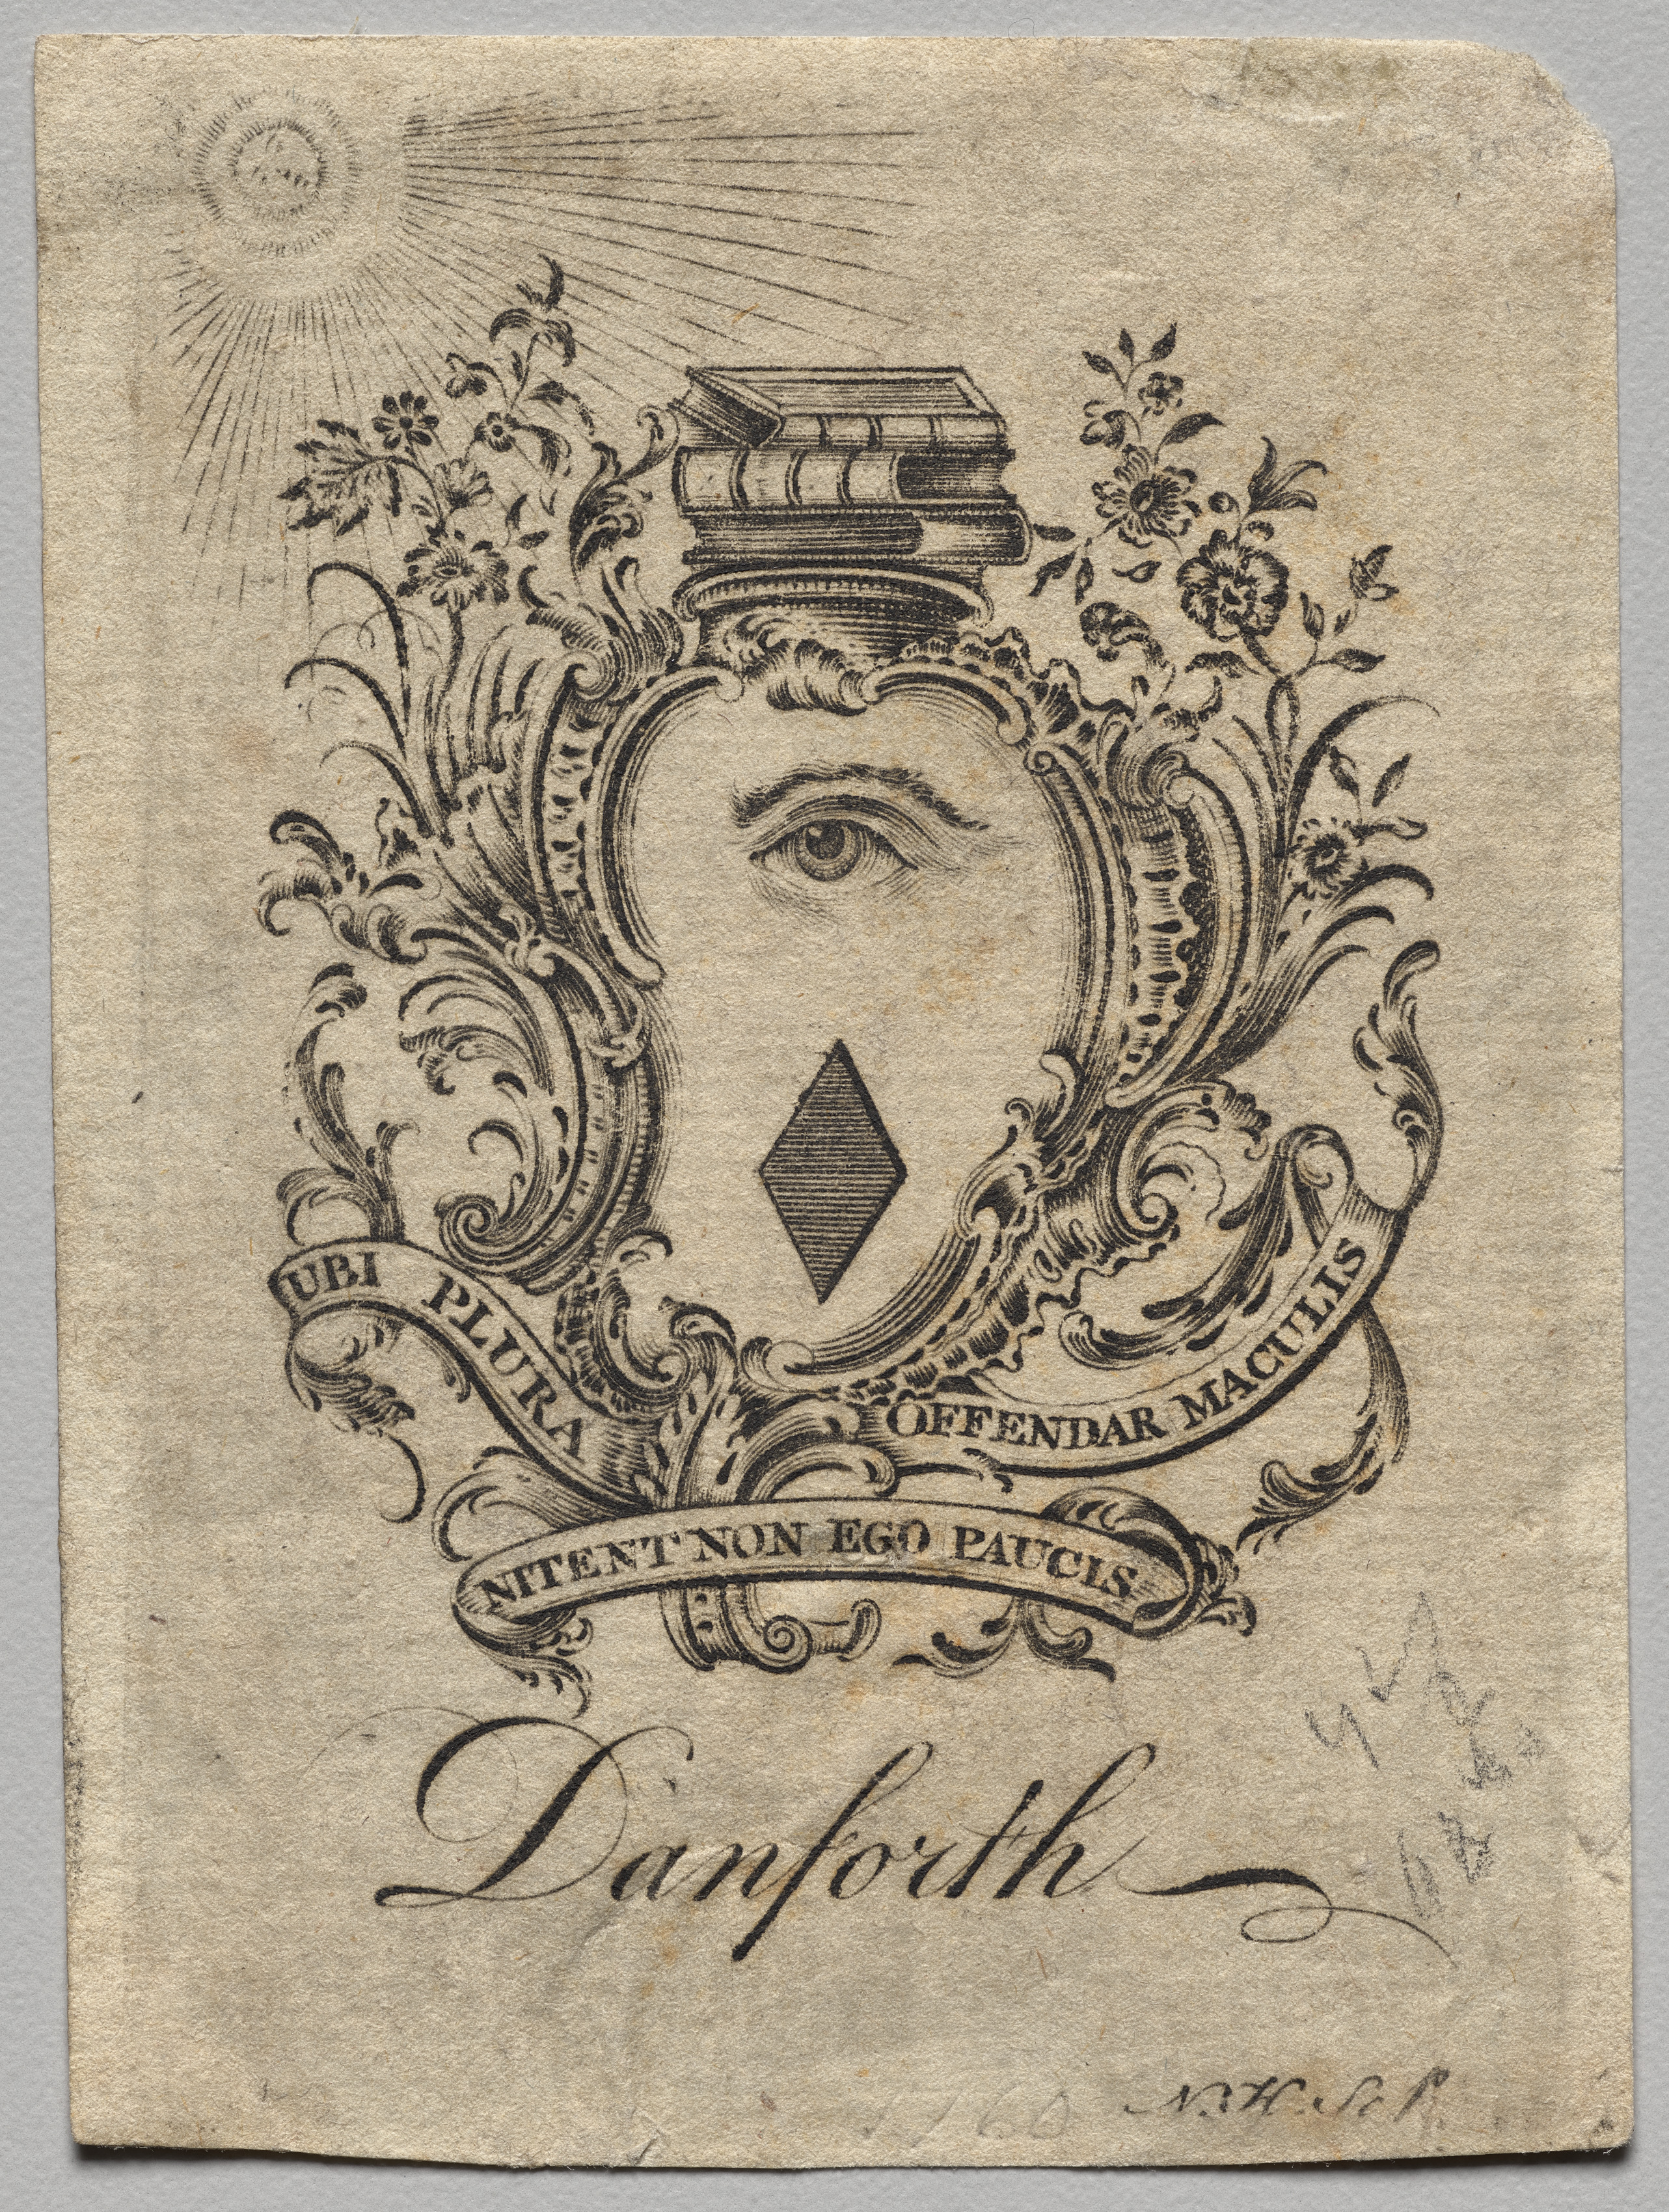 Bookplate:  Coat of Arms with Danforth inscribed